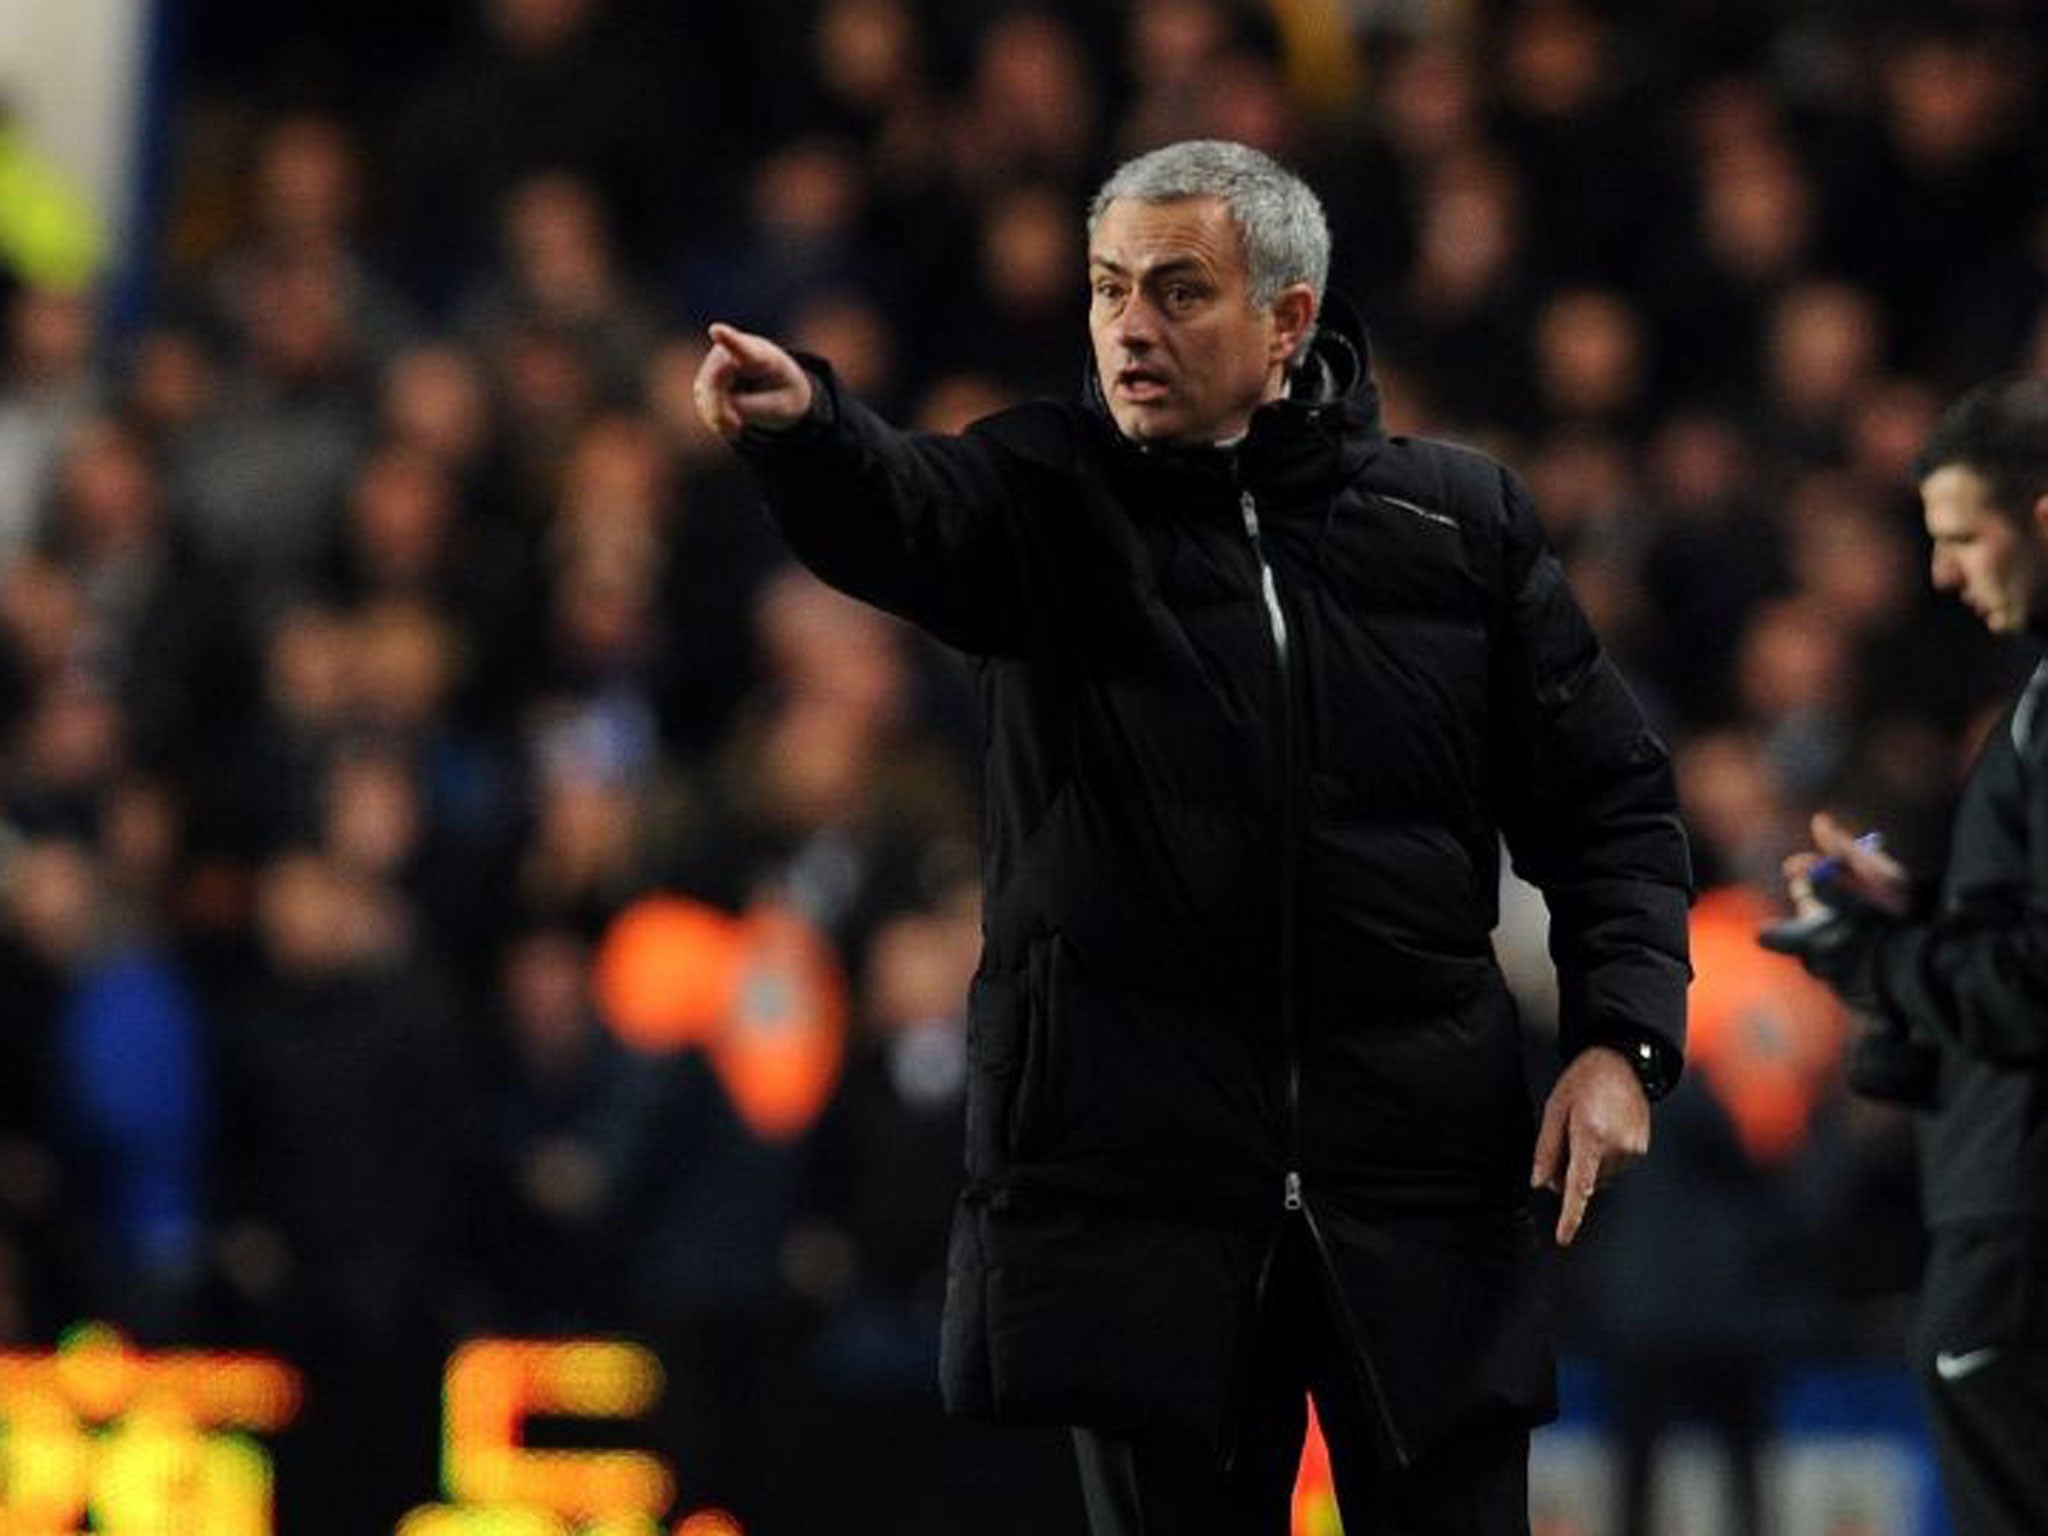 Mourinho has questioned the number of foreign managers in the UK, admitting he was part of the problem